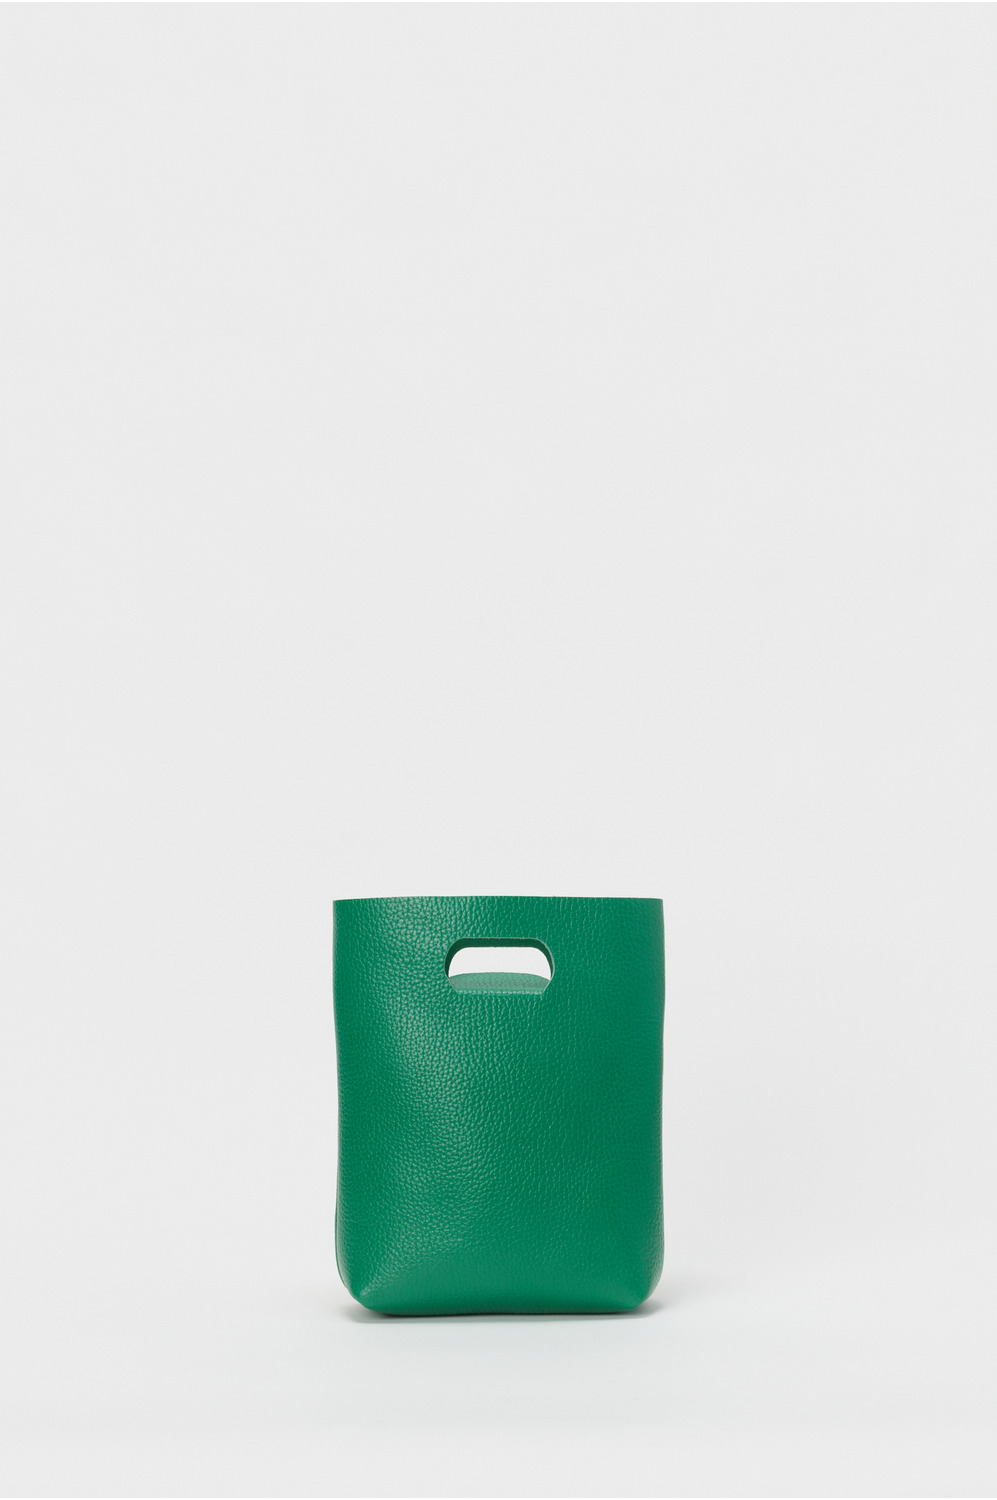 not eco bag small 詳細画像 green 1